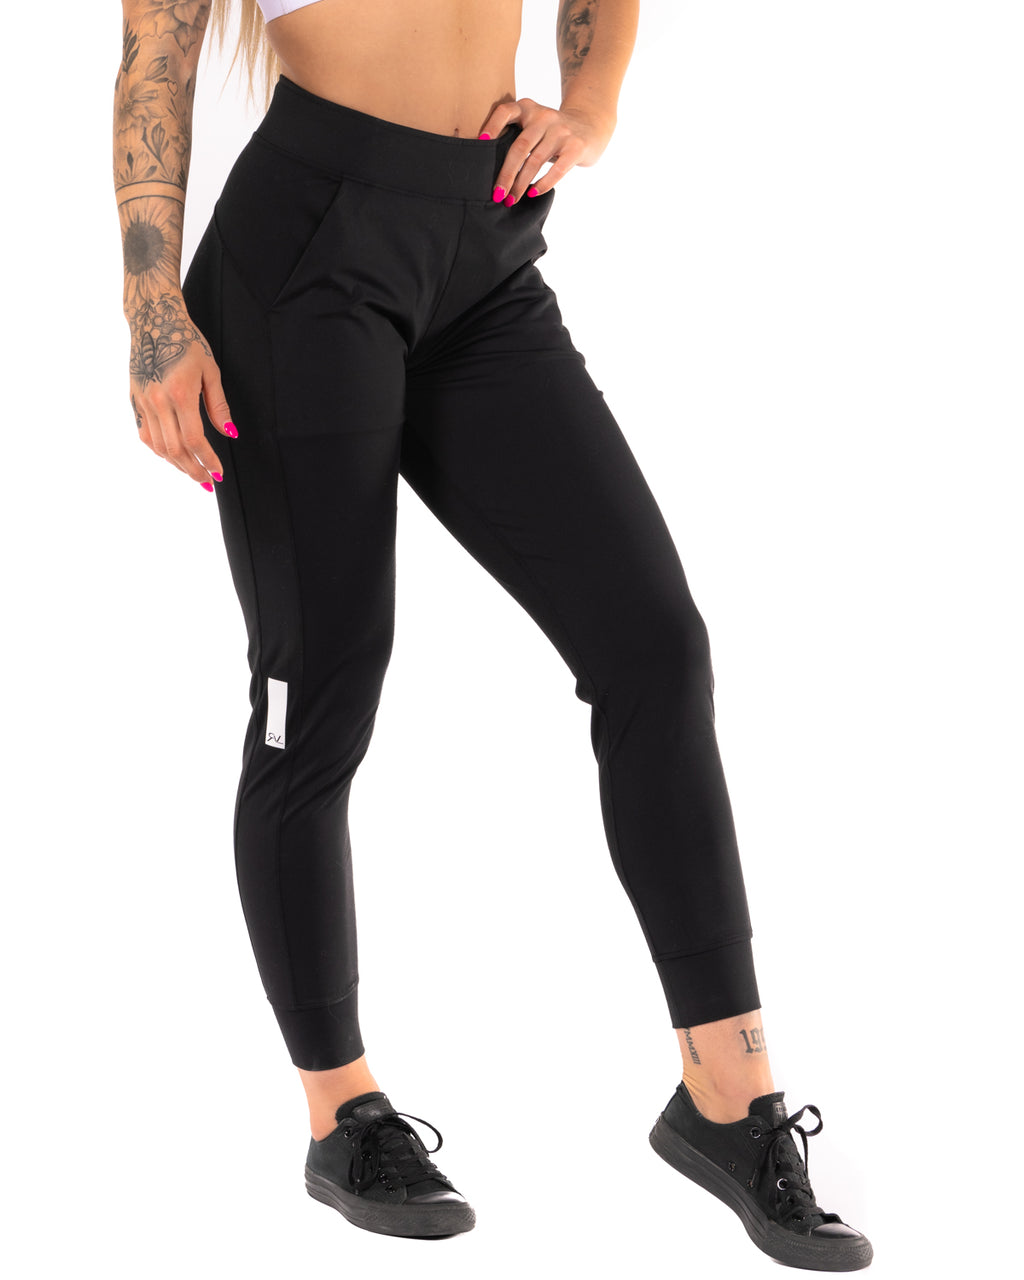 HDE Reflective Joggers Pants for Women High India